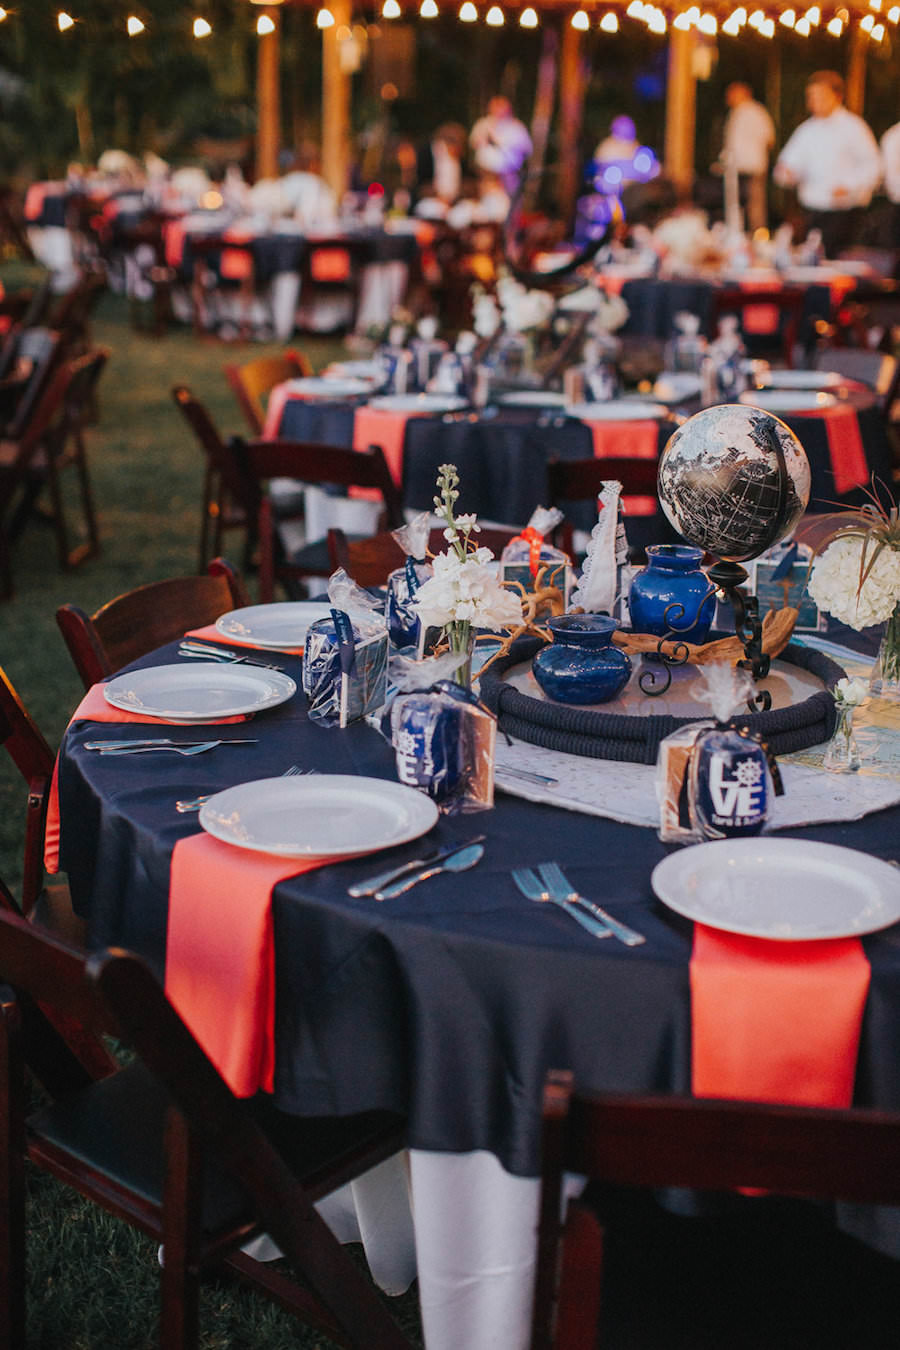 Tampa Outdoor Waterfront Wedding Reception Decor with Nautical Anchor Table Decorations with Globes, Anchors and Navy and Red Linens